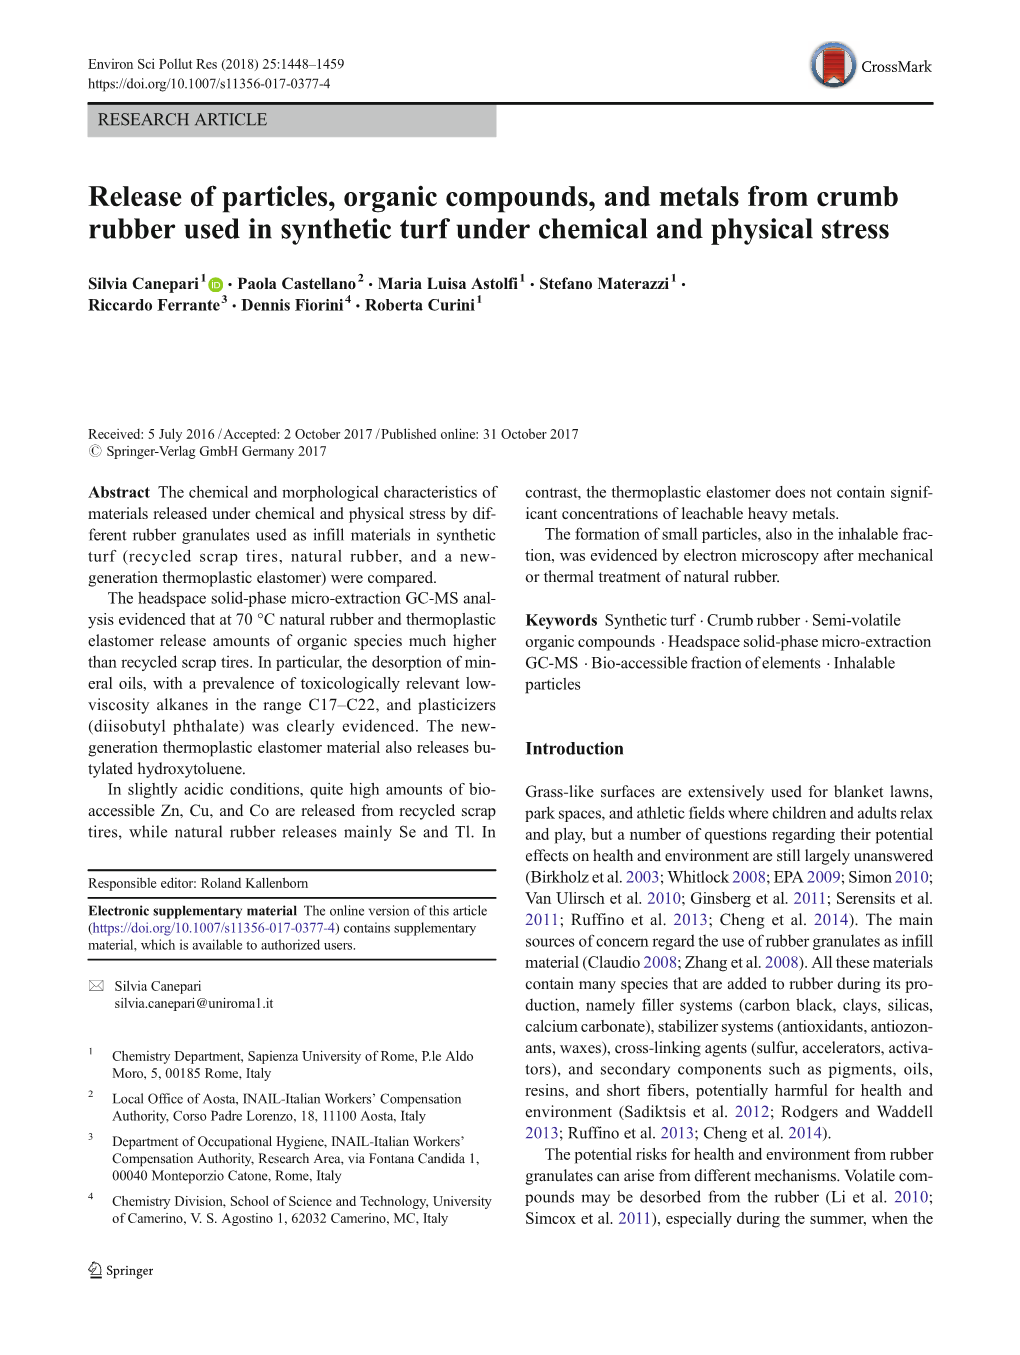 Release of Particles, Organic Compounds, and Metals from Crumb Rubber Used in Synthetic Turf Under Chemical and Physical Stress